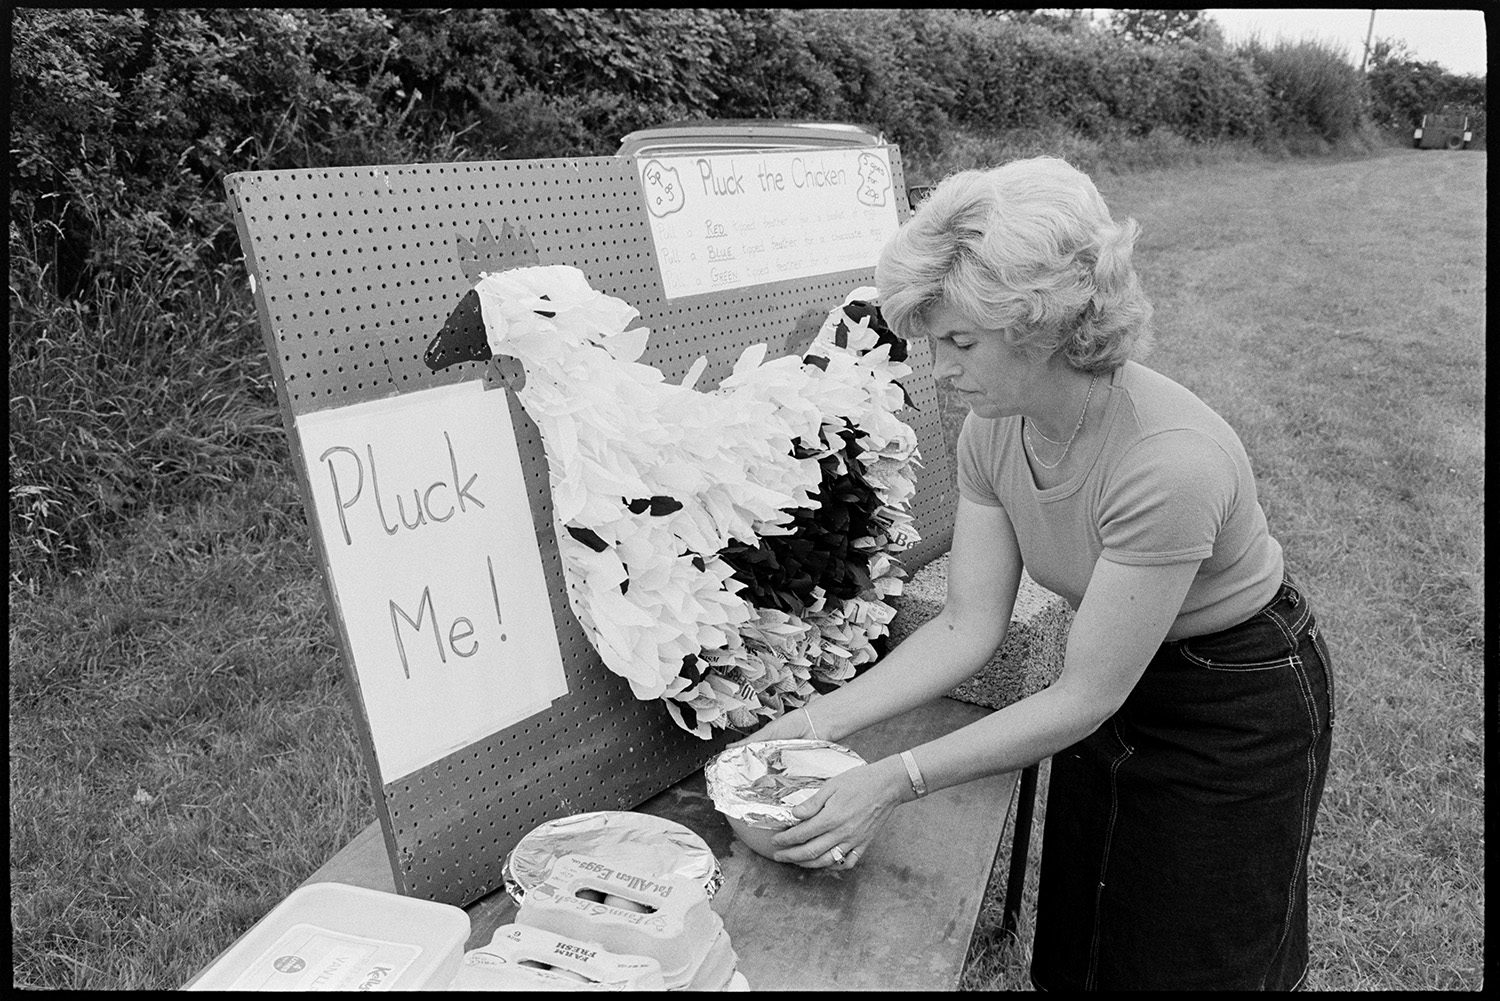 Sports, start of race, people arriving for fancy dress competition.
[A woman arranging a table in a field at Roborough Sports Day with a 'Pluck the Chicken' game. A model chicken and egg boxes are on the table.]